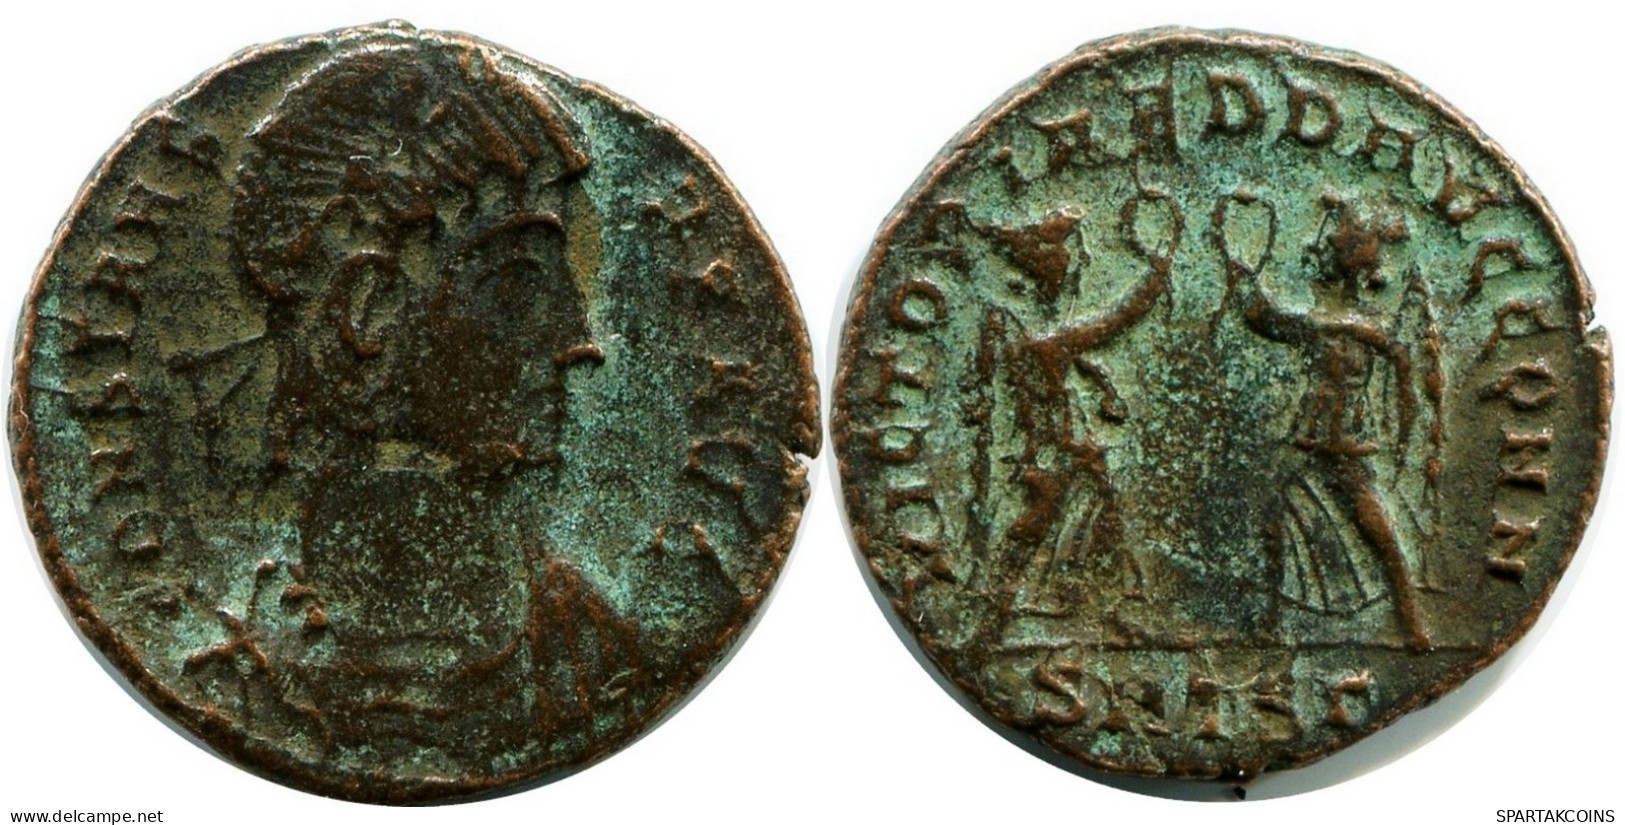 CONSTANS MINTED IN THESSALONICA FOUND IN IHNASYAH HOARD EGYPT #ANC11895.14.E.A - El Imperio Christiano (307 / 363)